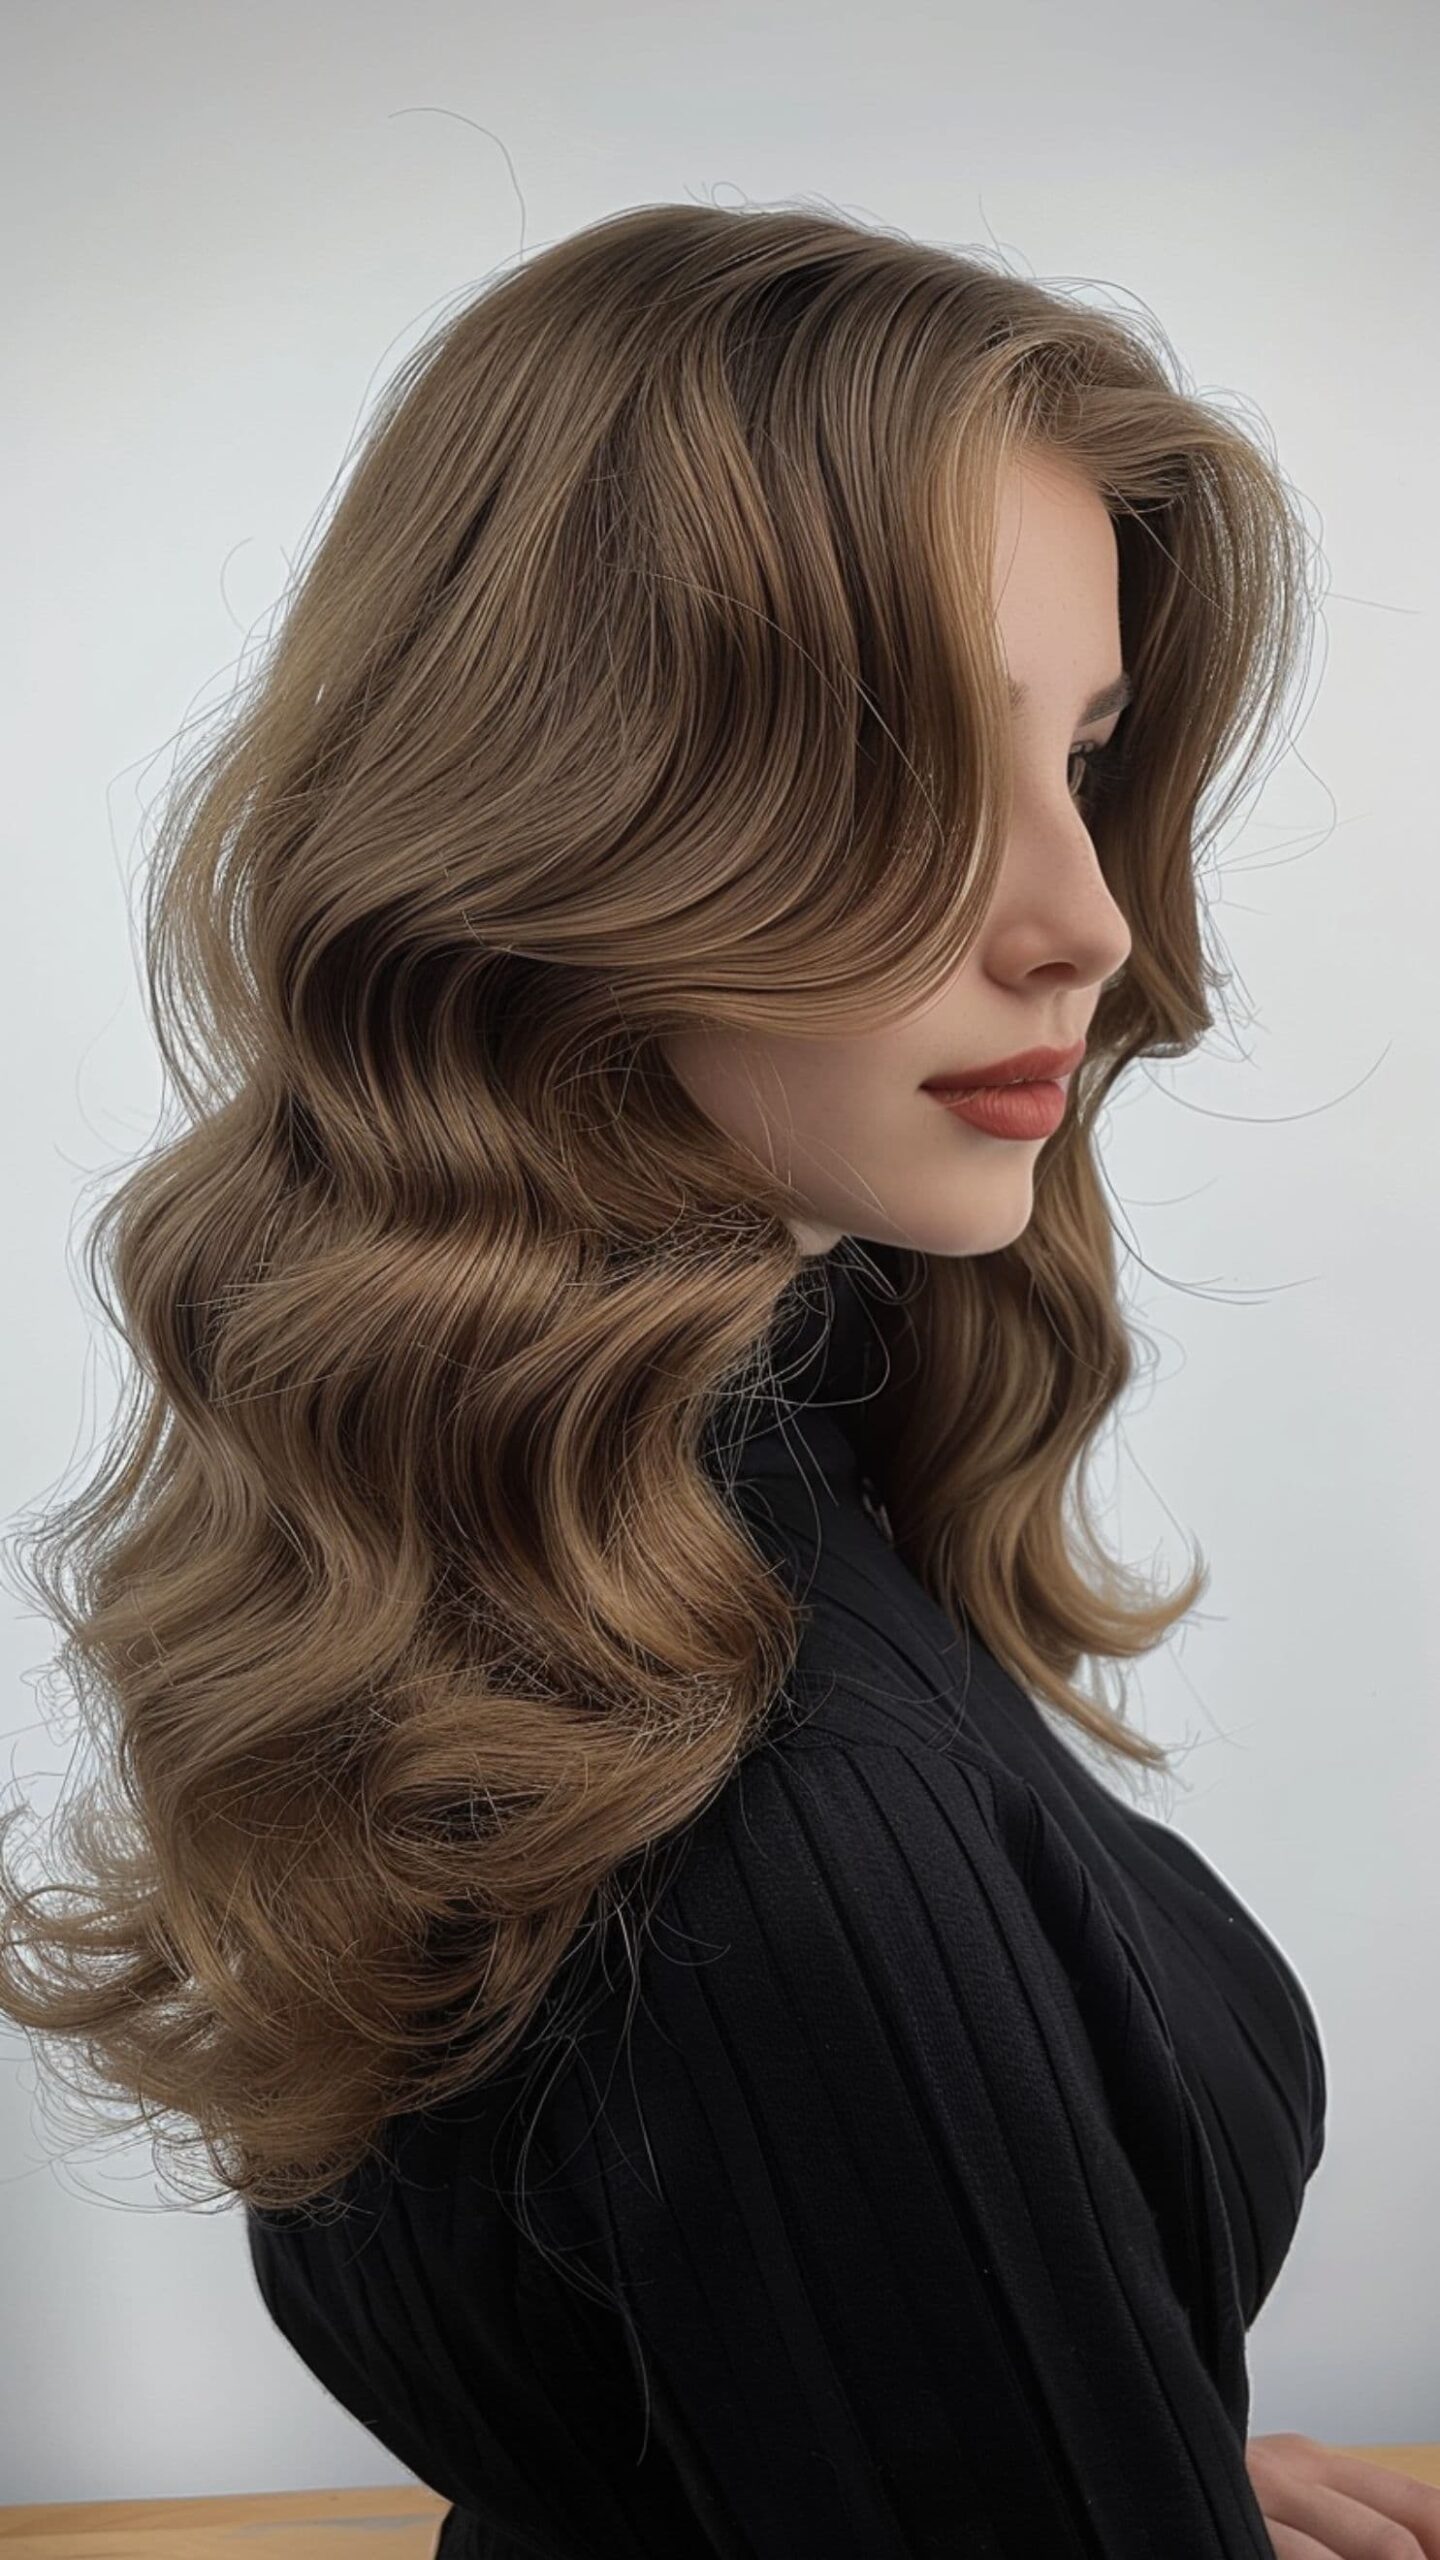 A woman modelling a hollywood waves hairstyle.